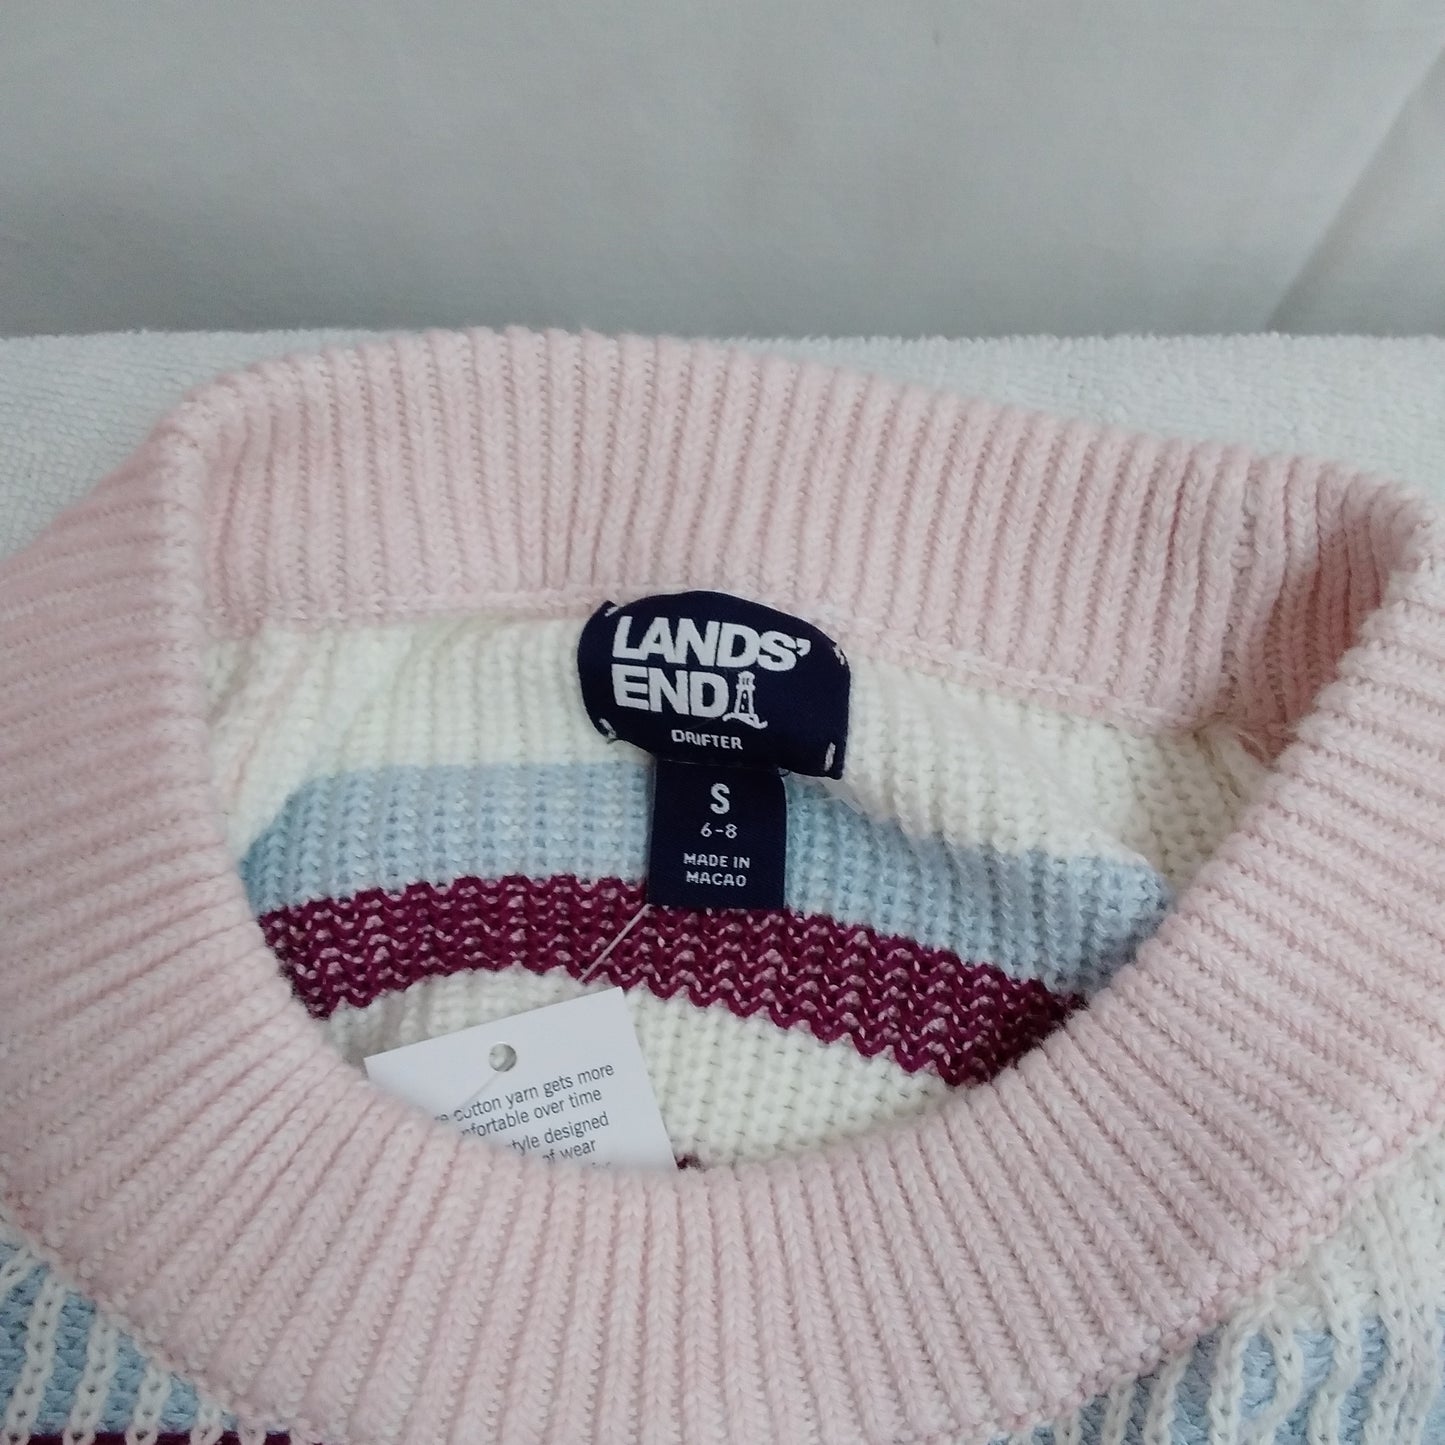 NWT -- Lands' End "Drifter" Crew Neck Sweater -- Size 6-8/S